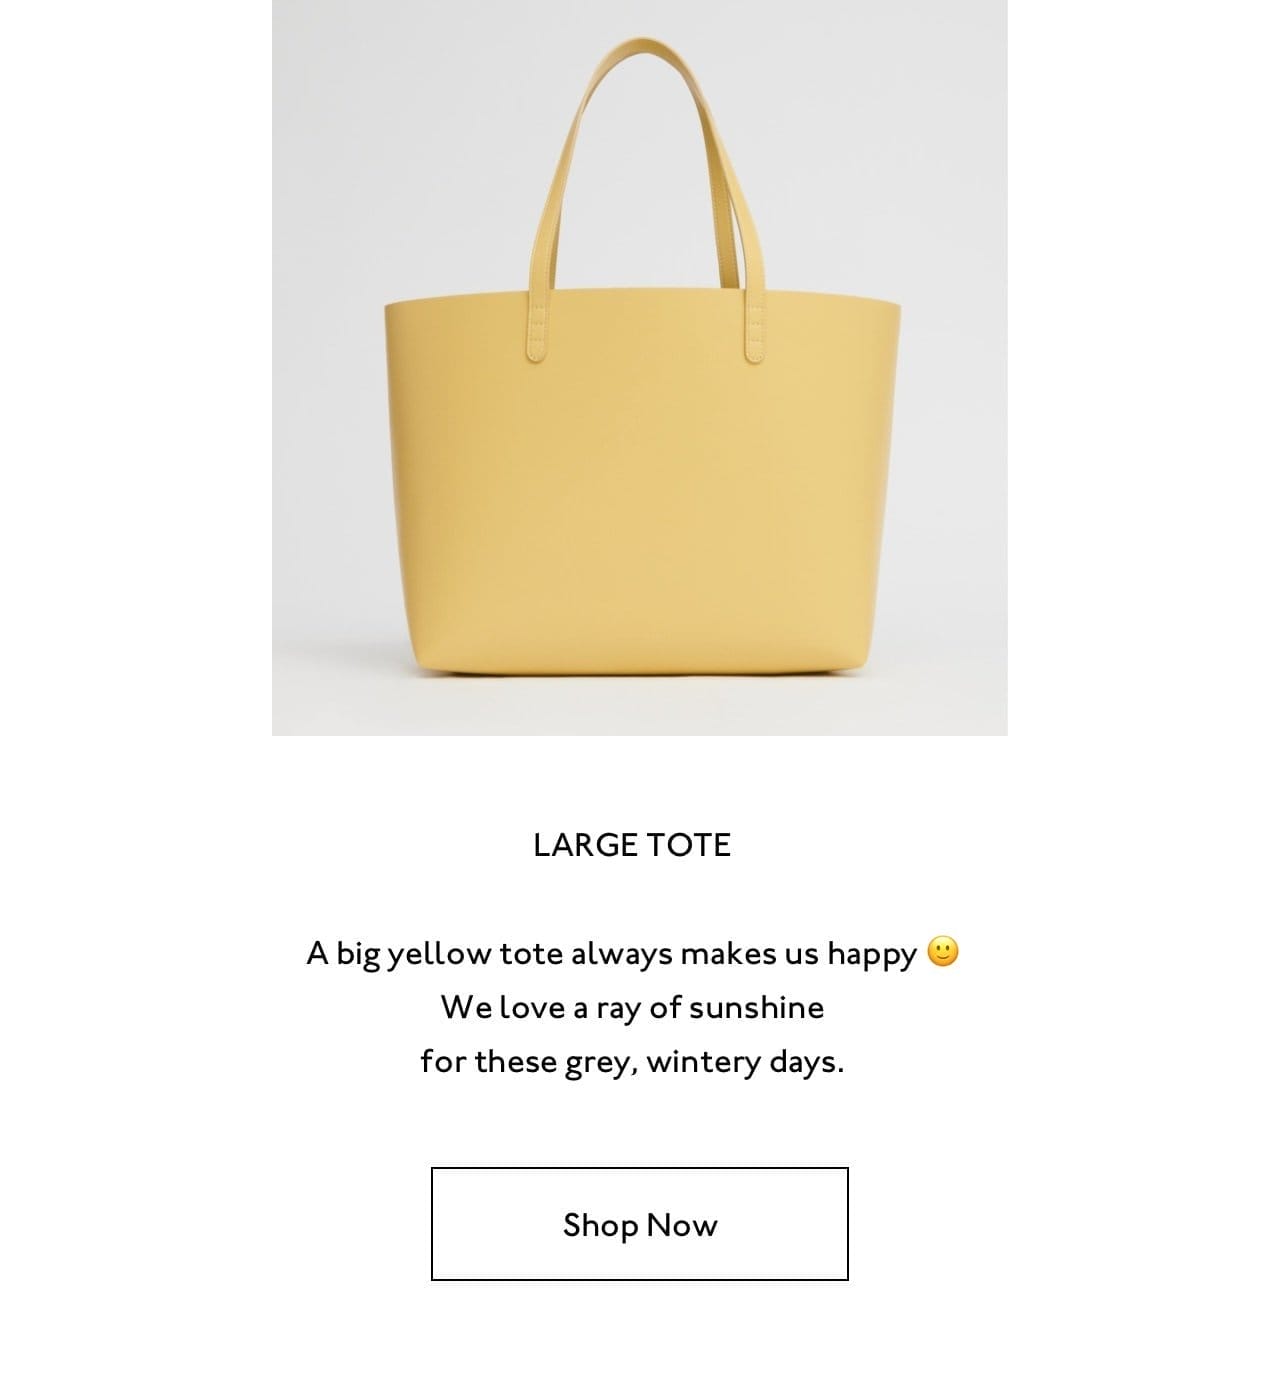 A big yellow tote always makes us happy :) We love a ray of sunshine for these grey, wintery days. Shop now.